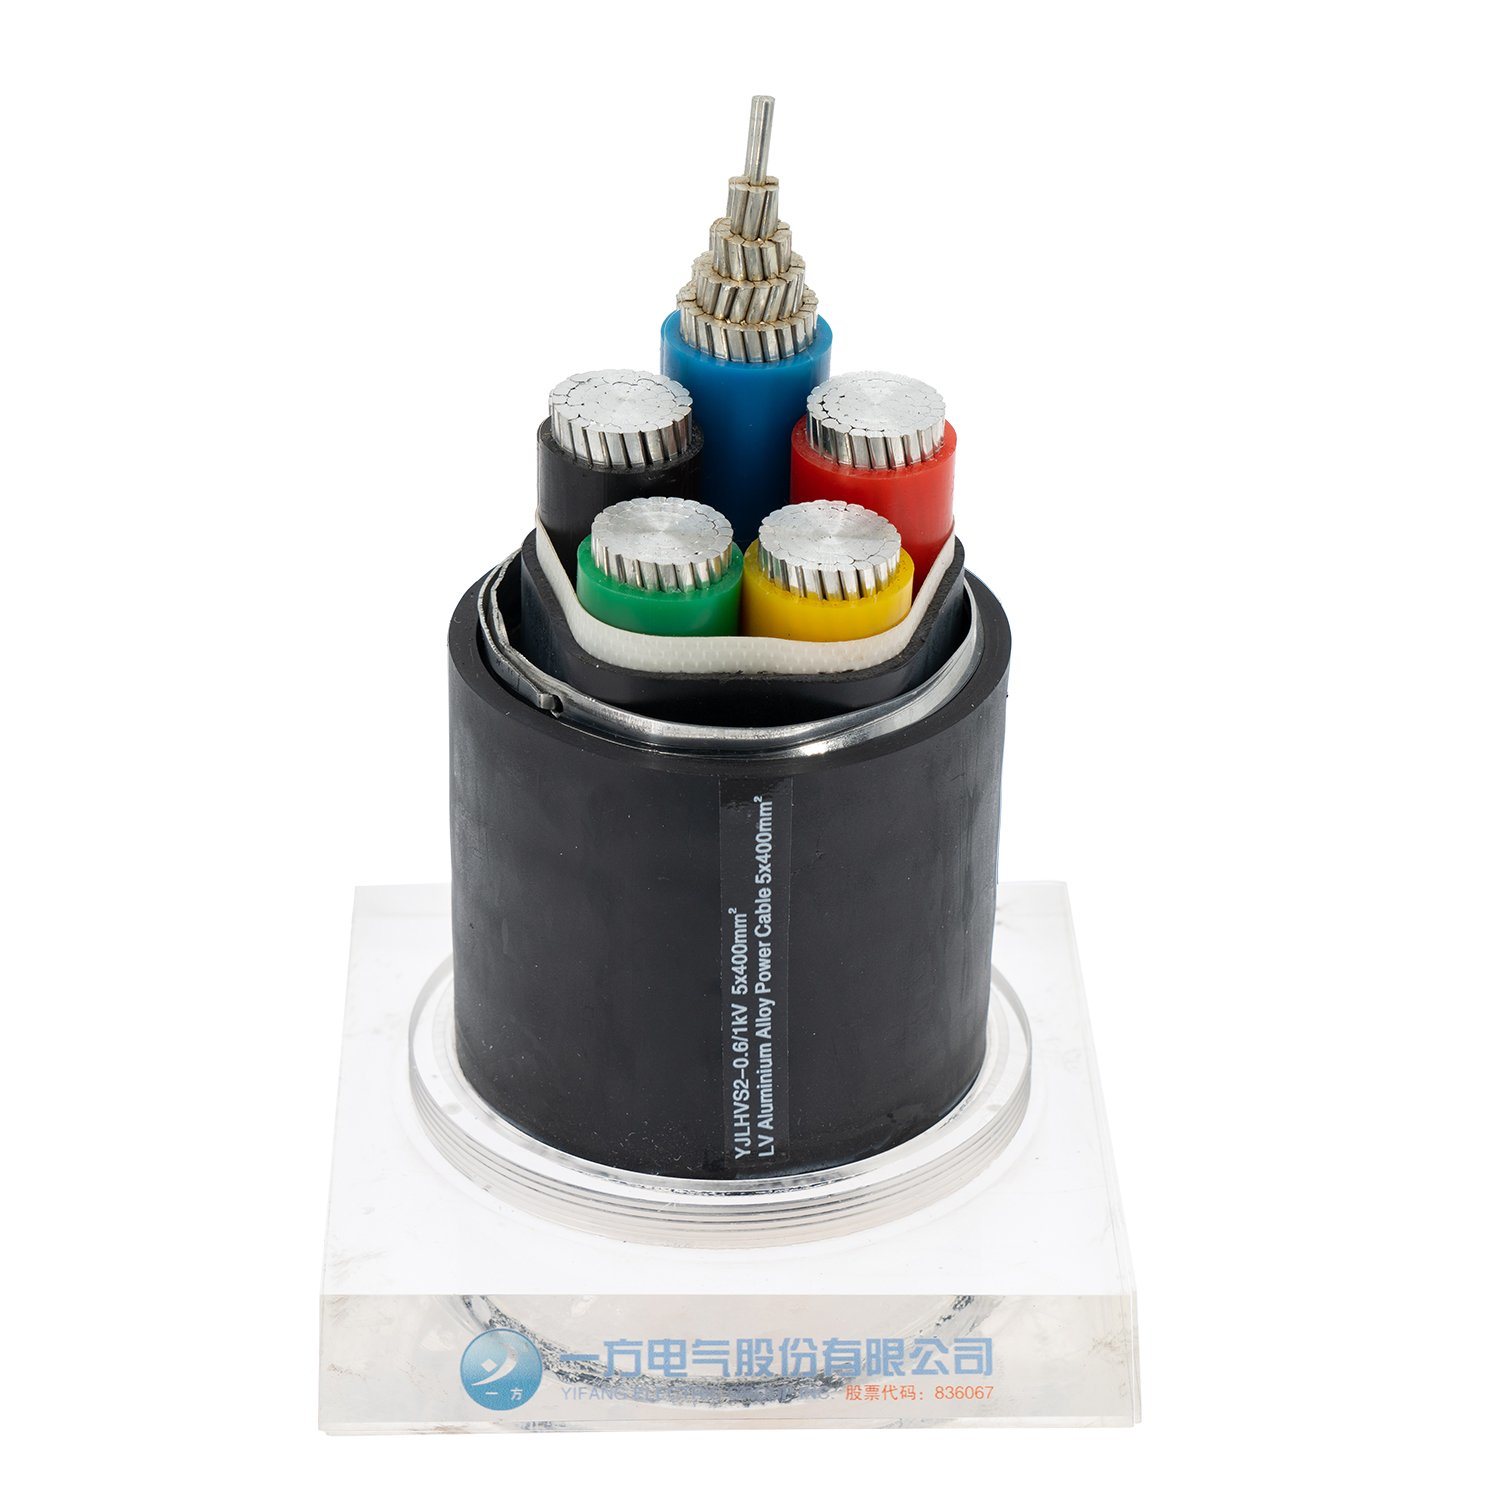 XLPE /PVC (Cross-linked polyethylene) Insulated Electric Power Cable 3 Phase 4 Core Electrical Cable